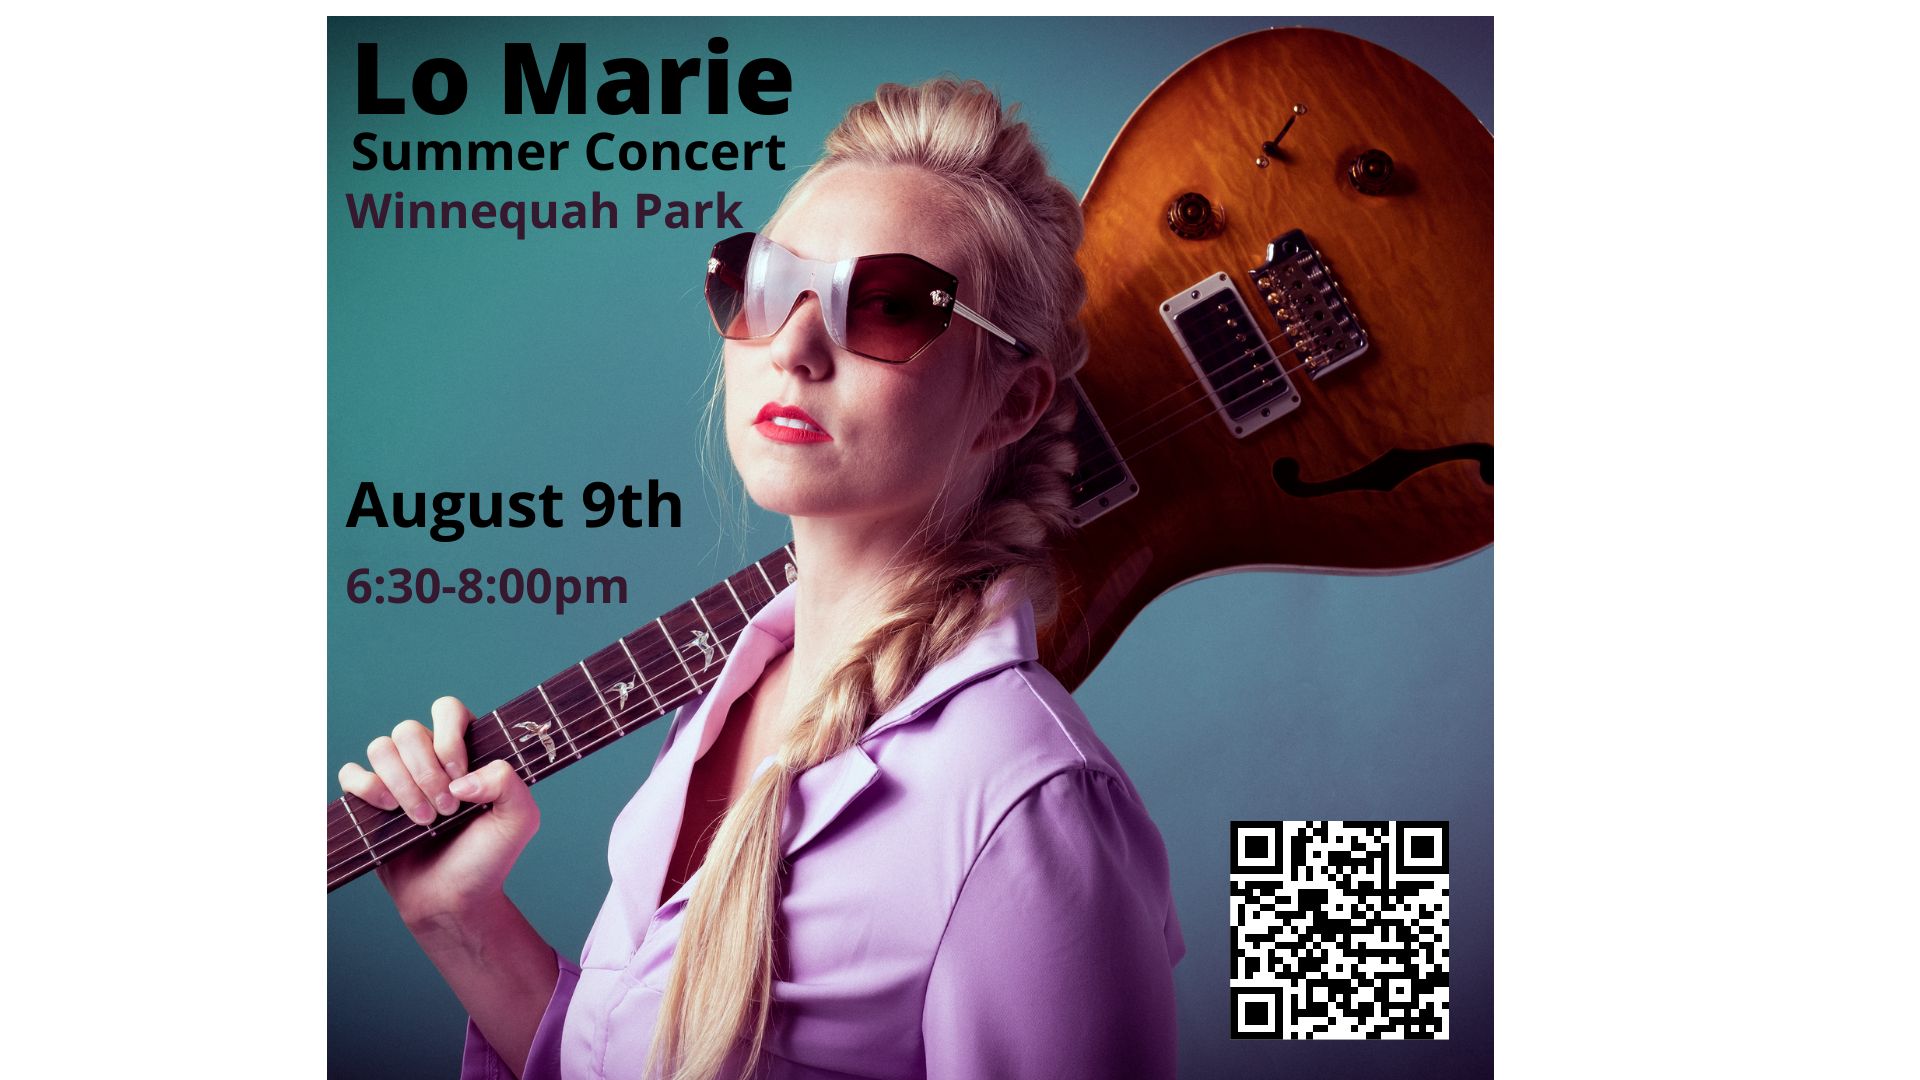 Lo Marie at Summer Concert Series in Winnequah Park. Monona, Wi Tuesday August 9th 6:30-8:00 PM, Monona, Wisconsin, United States